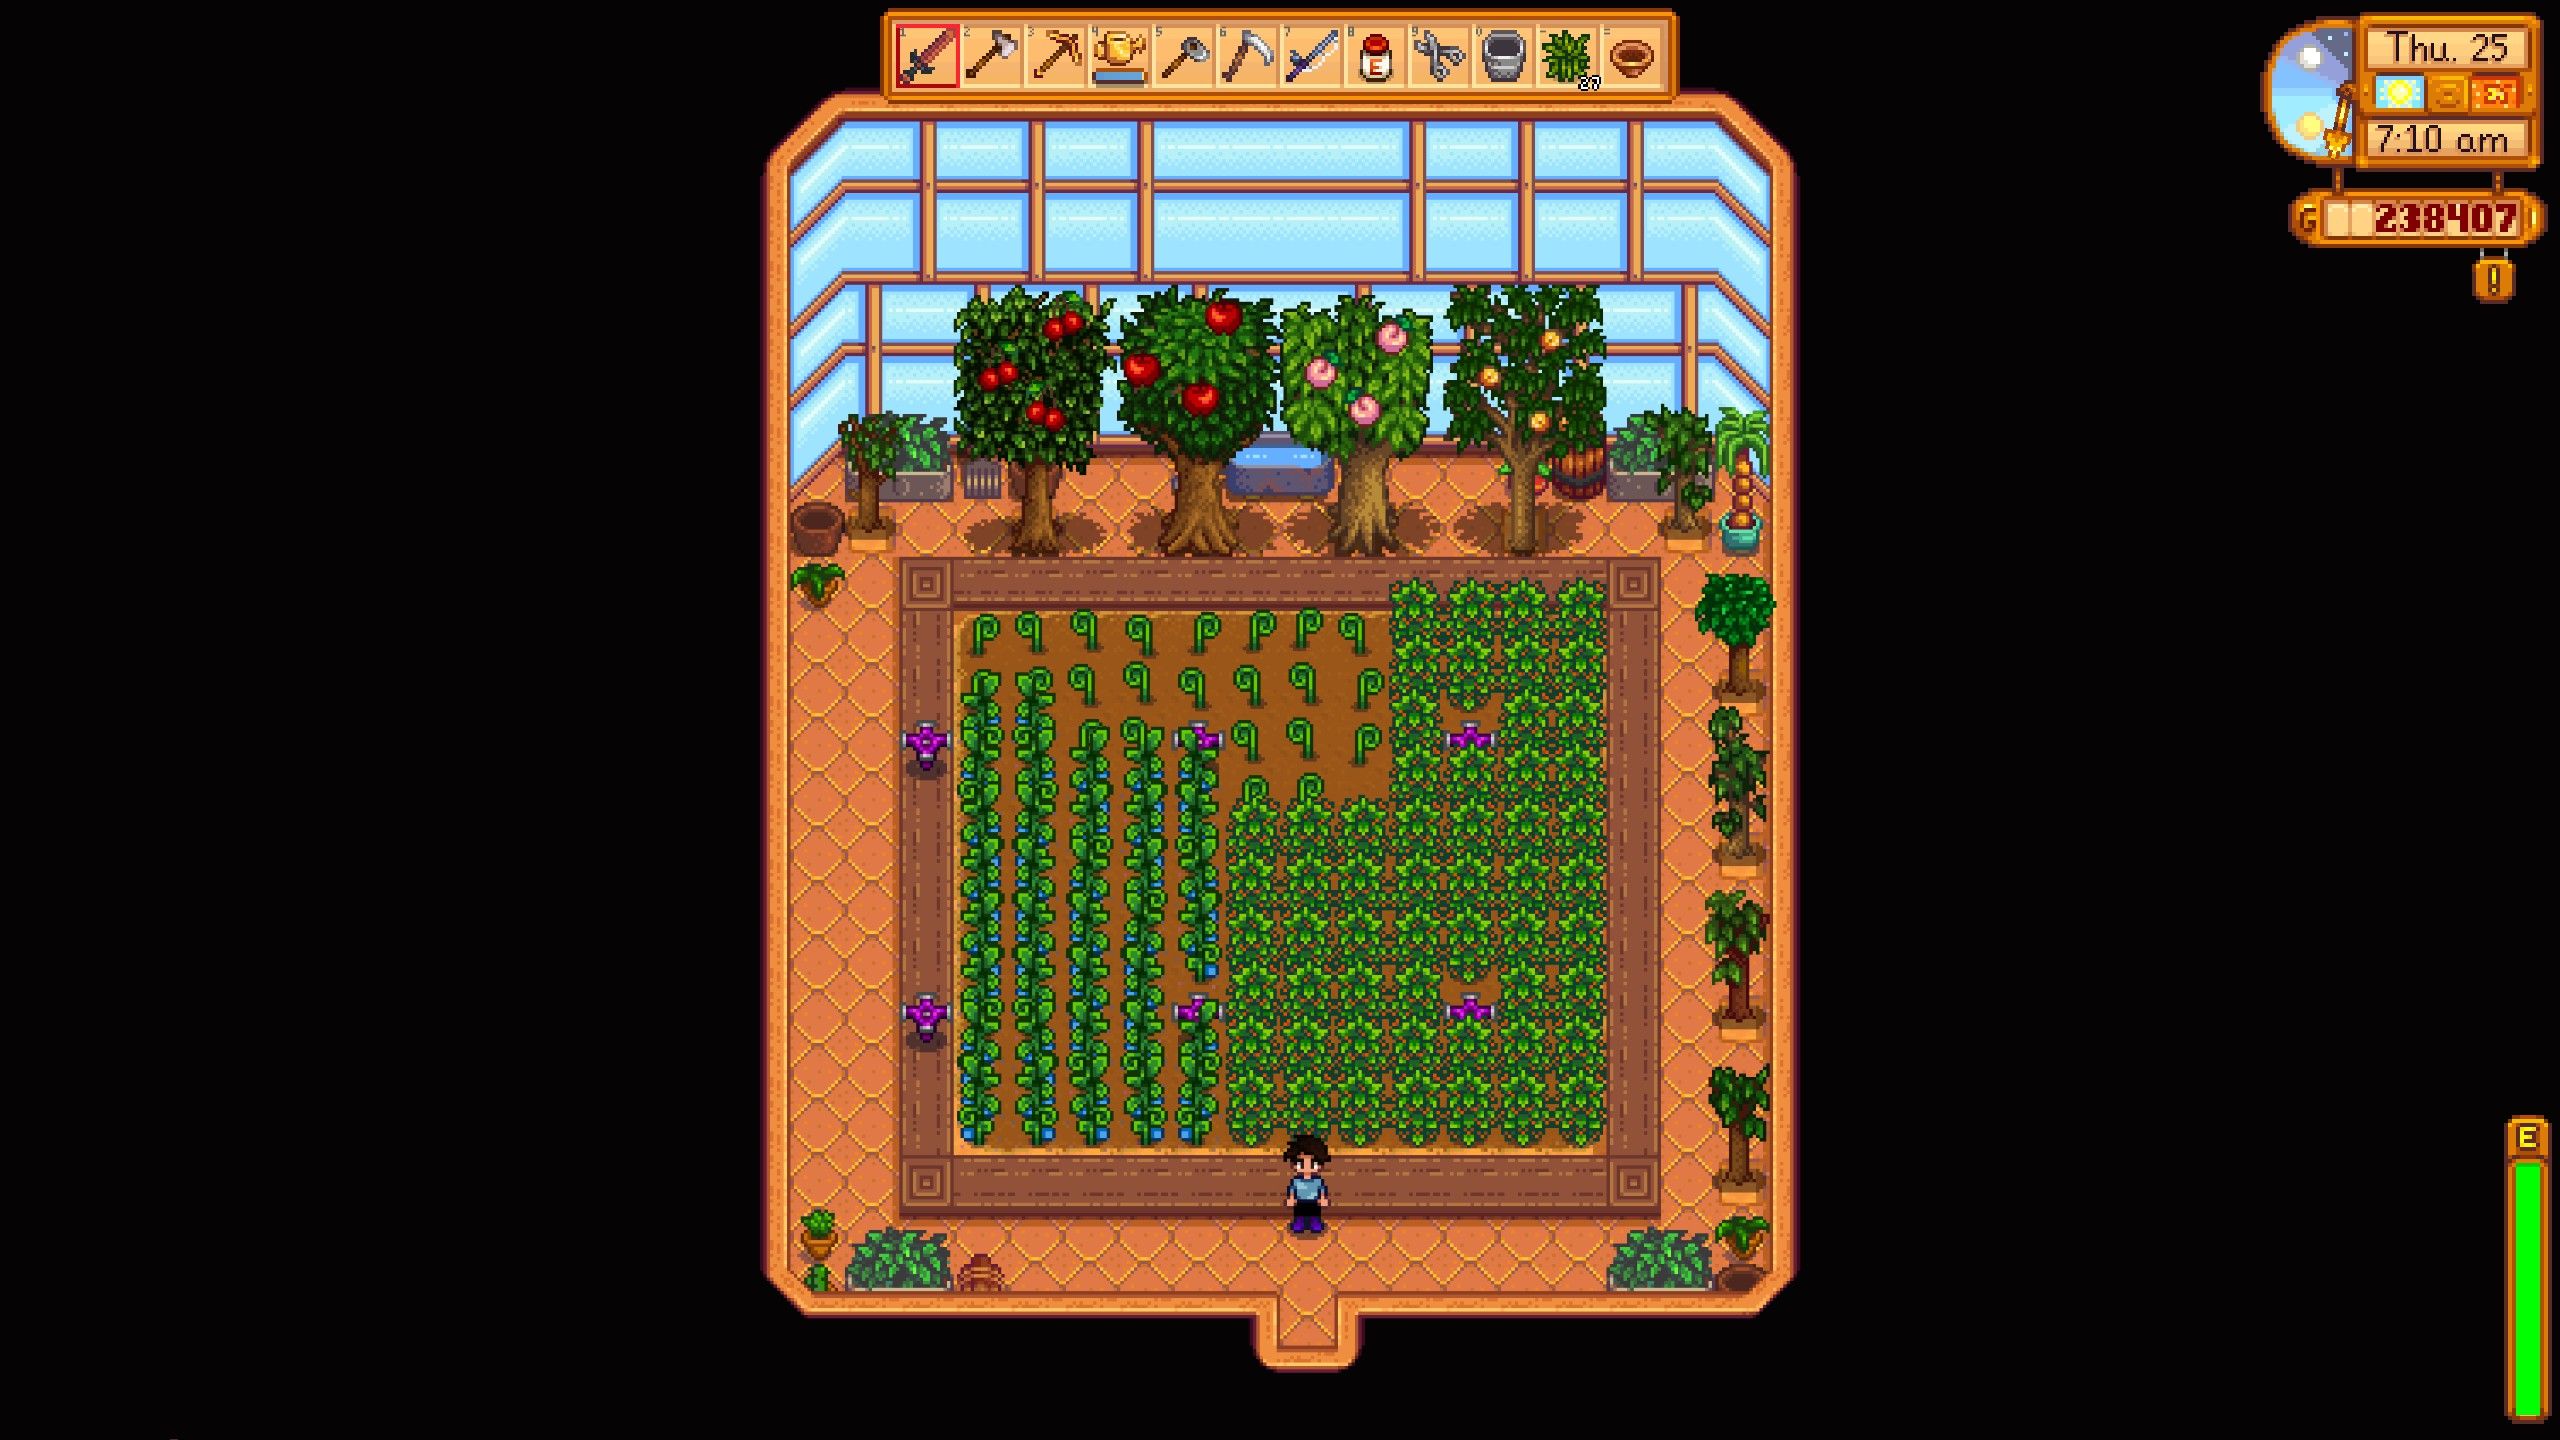 Stardew Valley Player Standing Inside Renovated Greenhouse With Ancient Fruit Plants, Coffee Plants And Fruit Trees